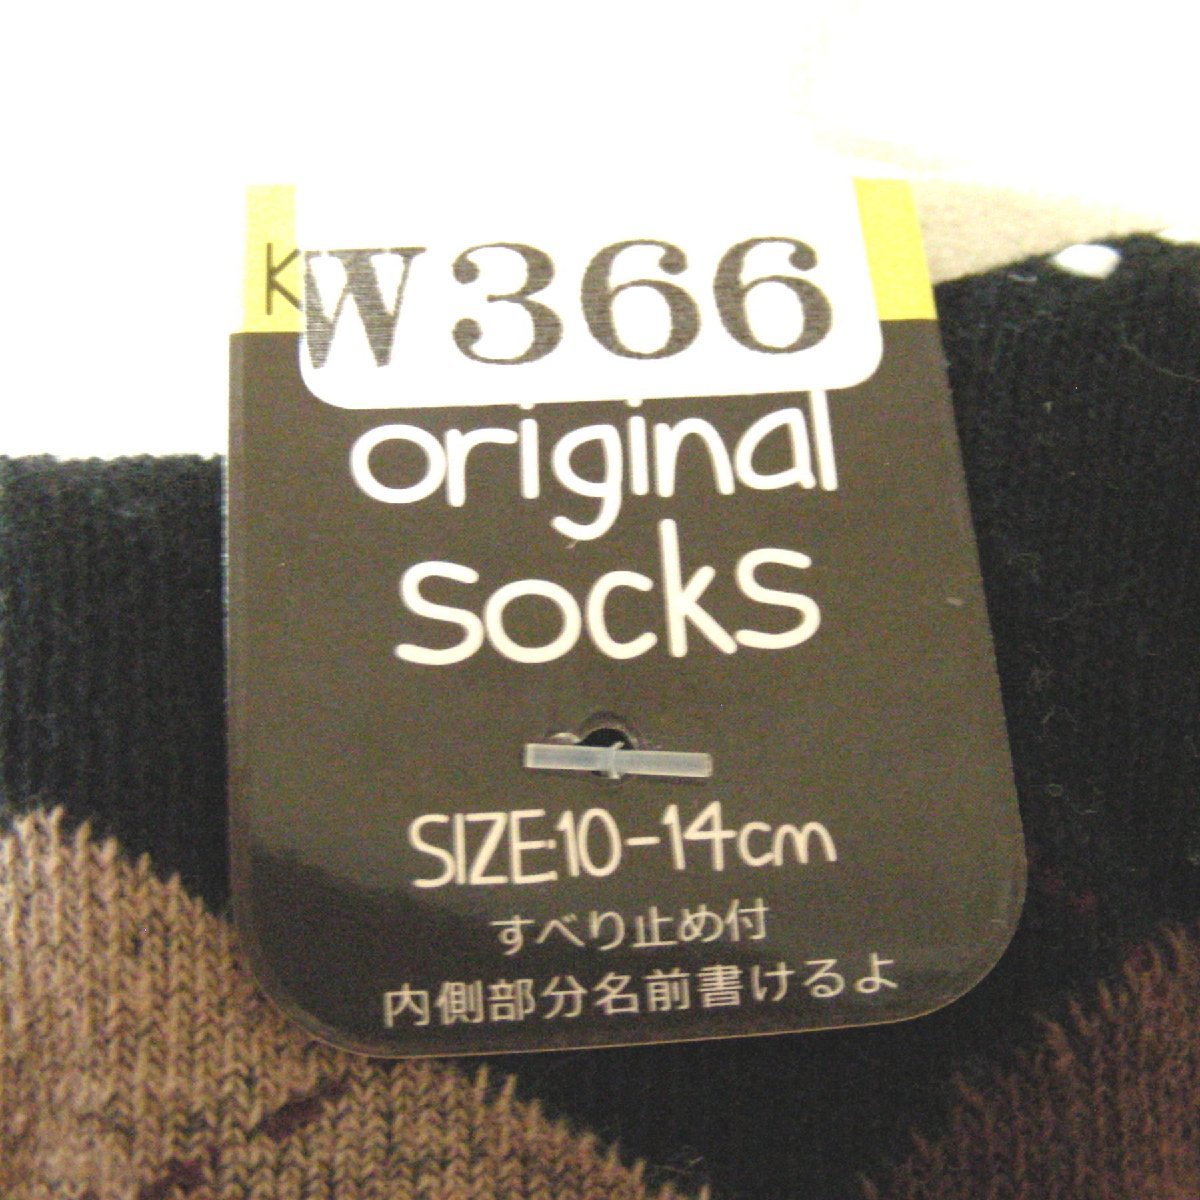 * unopened * unused * Kids socks * size 10~14cm* slipping cease attaching * child & baby * miscellaneous goods *W366